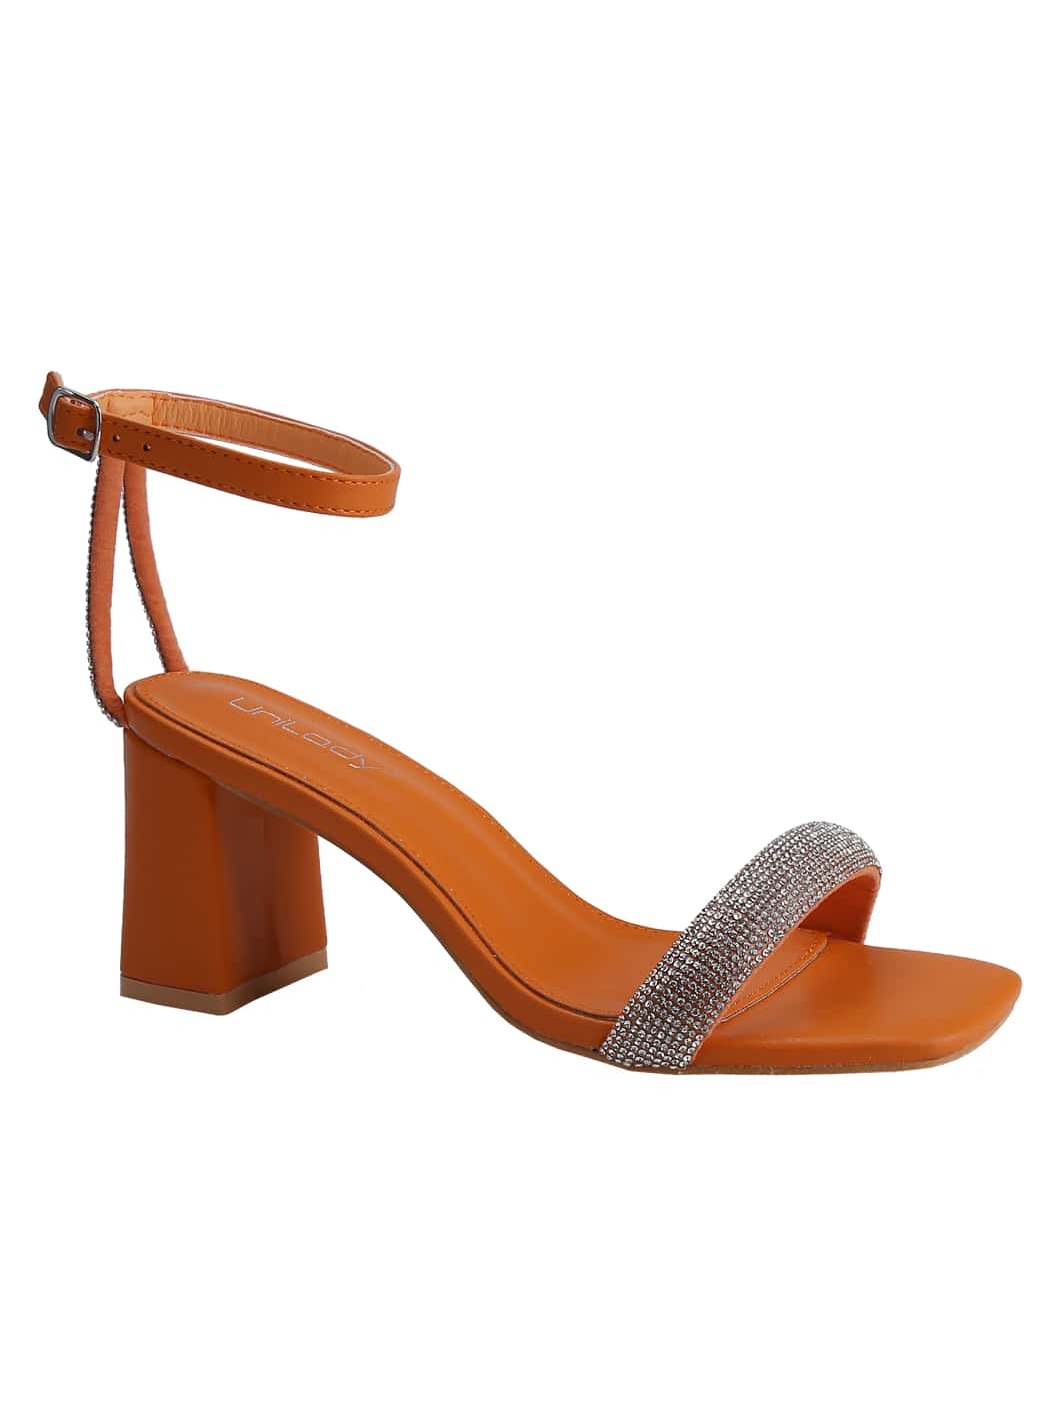 Chic and Comfortable Women's Chunky Heels with Ankle Strap – The Perfect Dress Shoes for All Occasionss